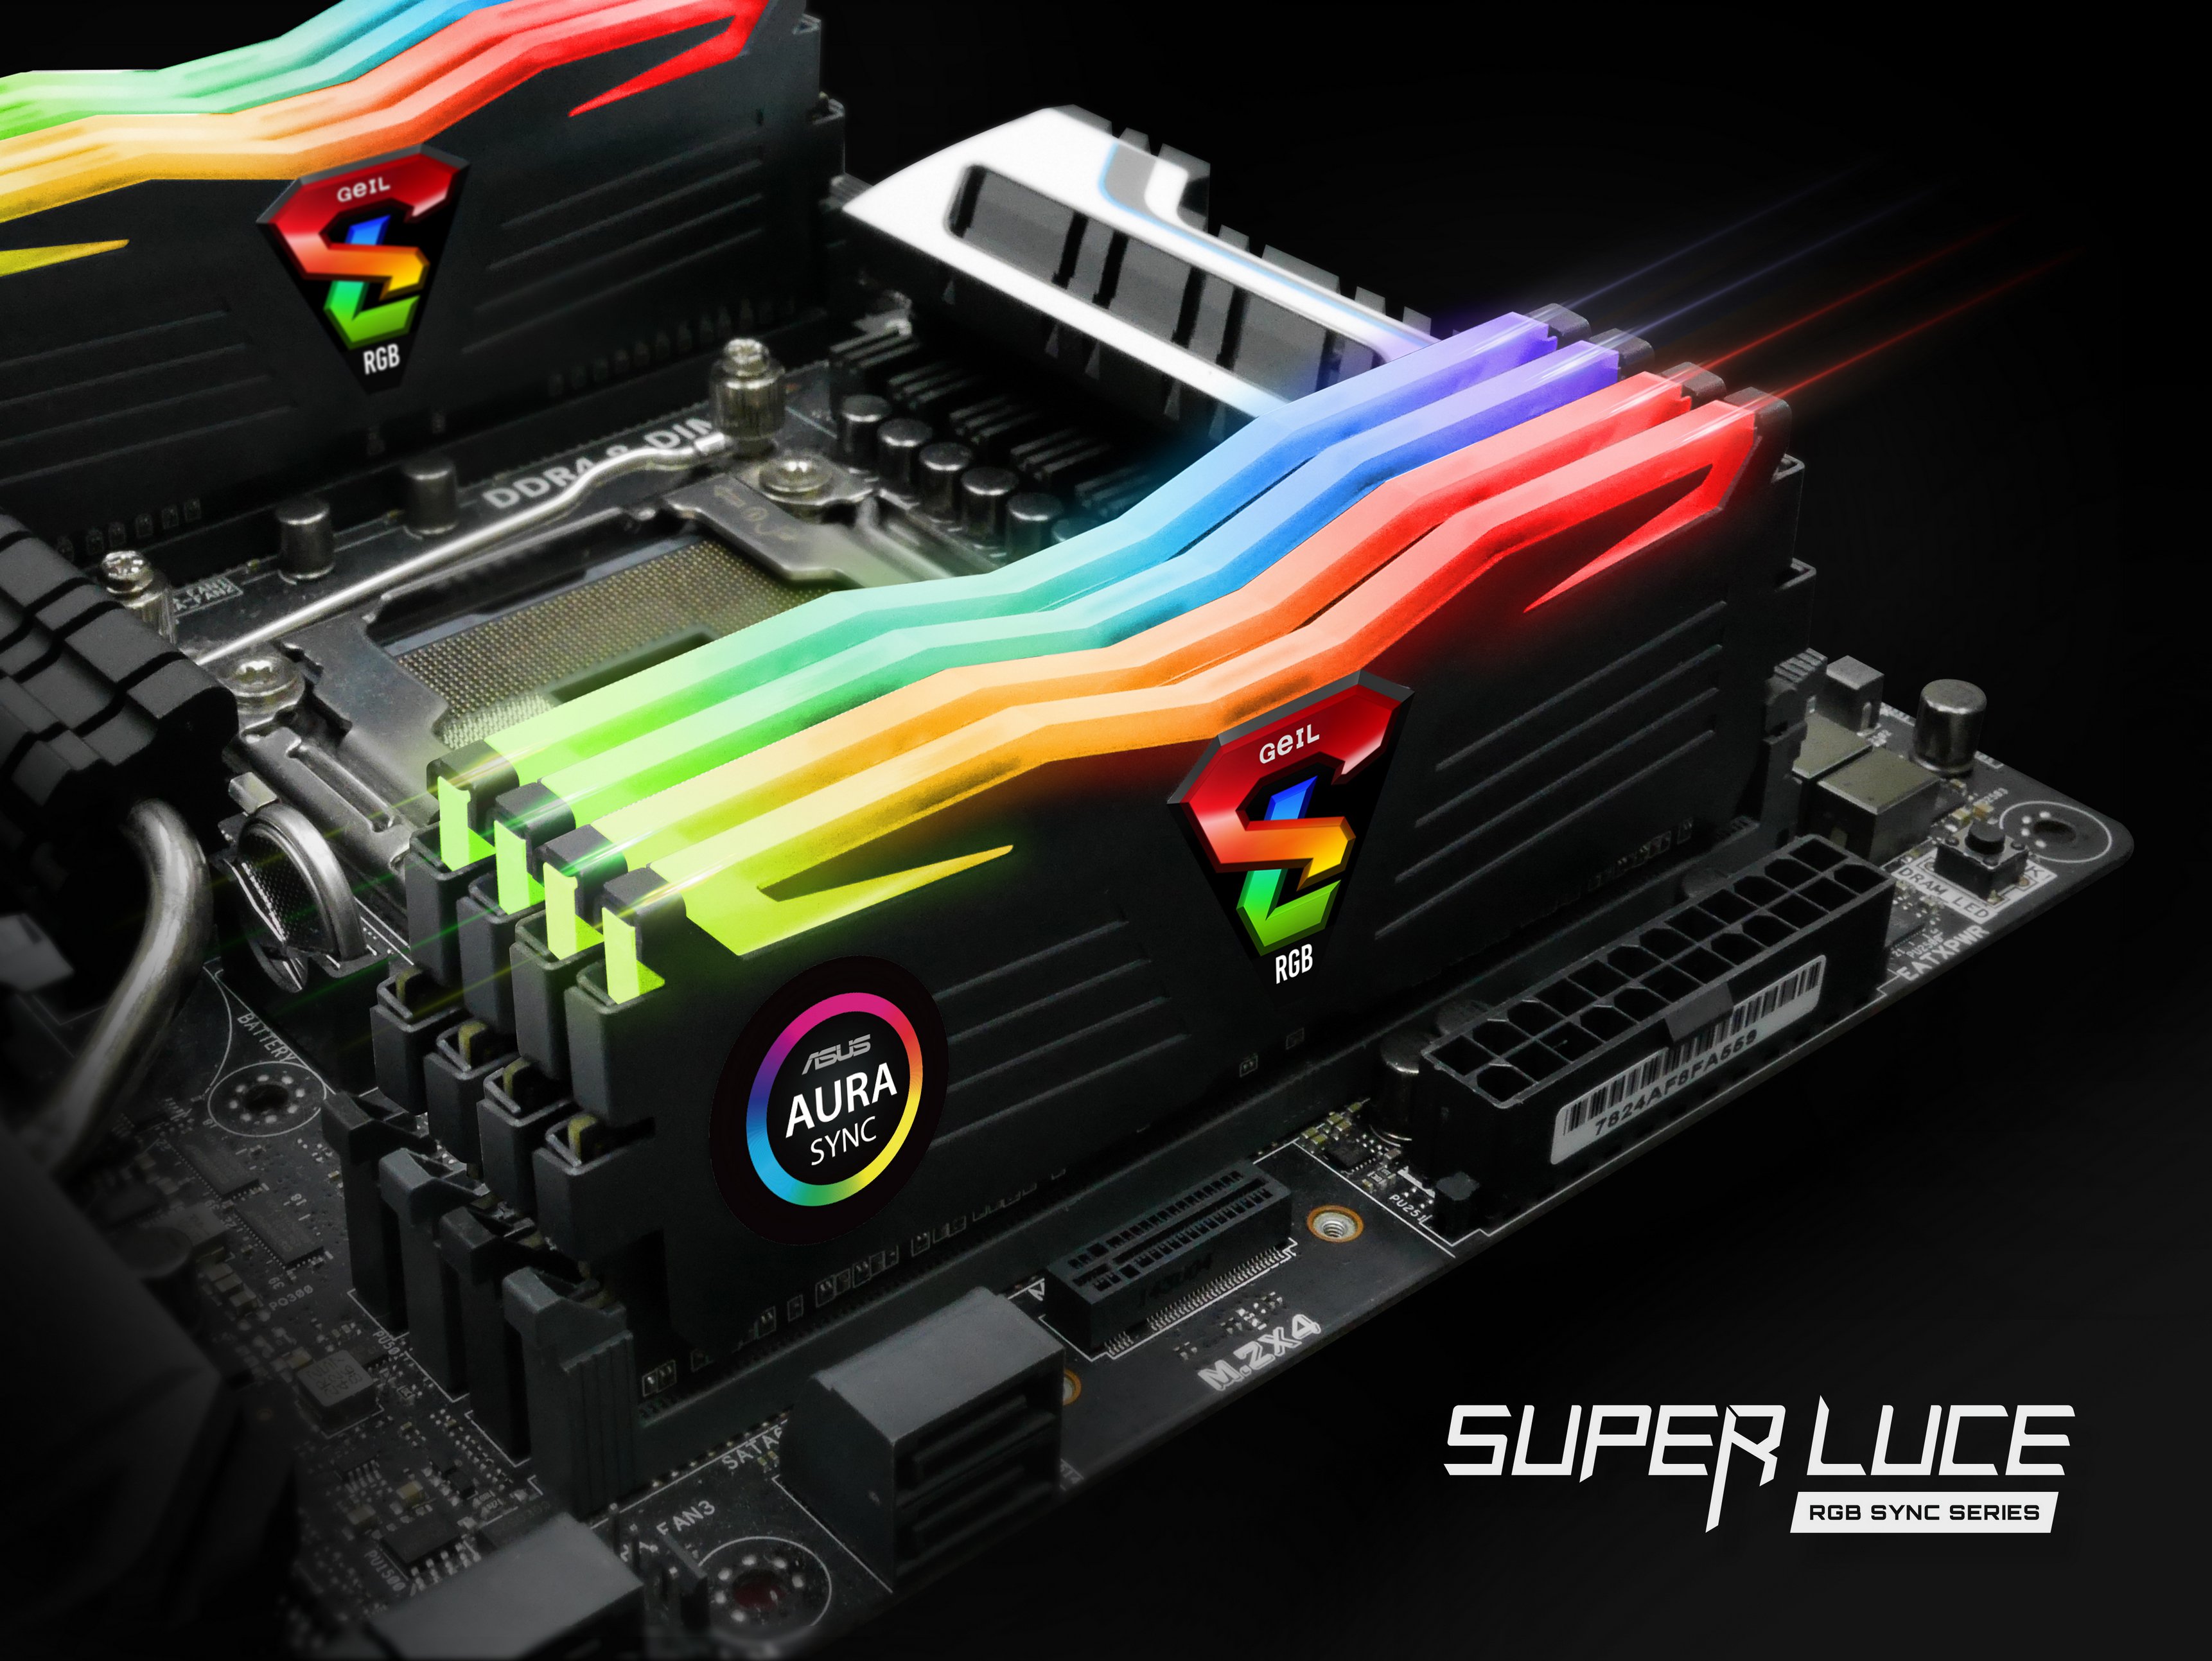 Memory Twitter: "Perfectly supporting ASUS AURA lighting control app, SUPER LUCE RGB SYNC provides the seamless synchronization of RGB lighting effects from the motherboard, graphics card, light strips, and memory